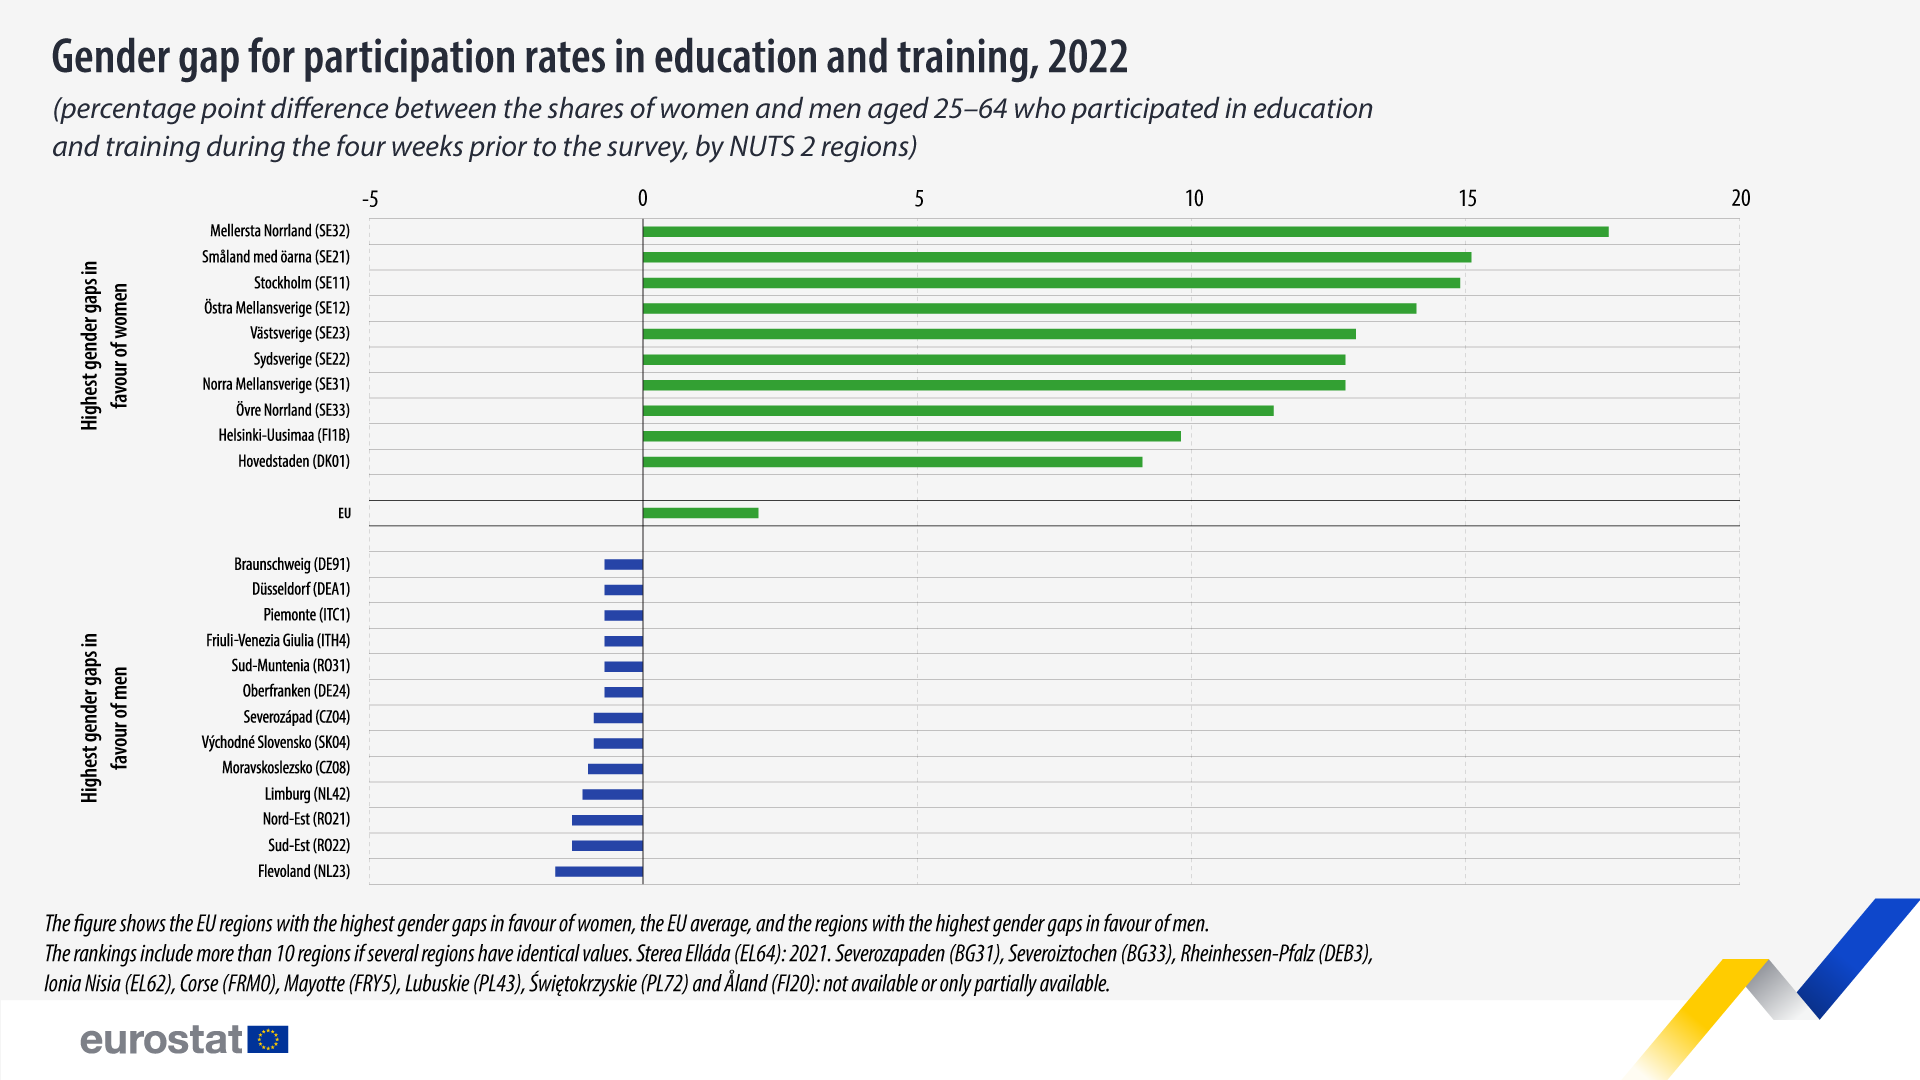 Horizontal bar chart: gender gap for participation rates in education and training, 2022 (percentage point difference between the shares of women and men aged 25-64 who participated in education and training during the four weeks prior to the survey, by NUTS 2 regions)